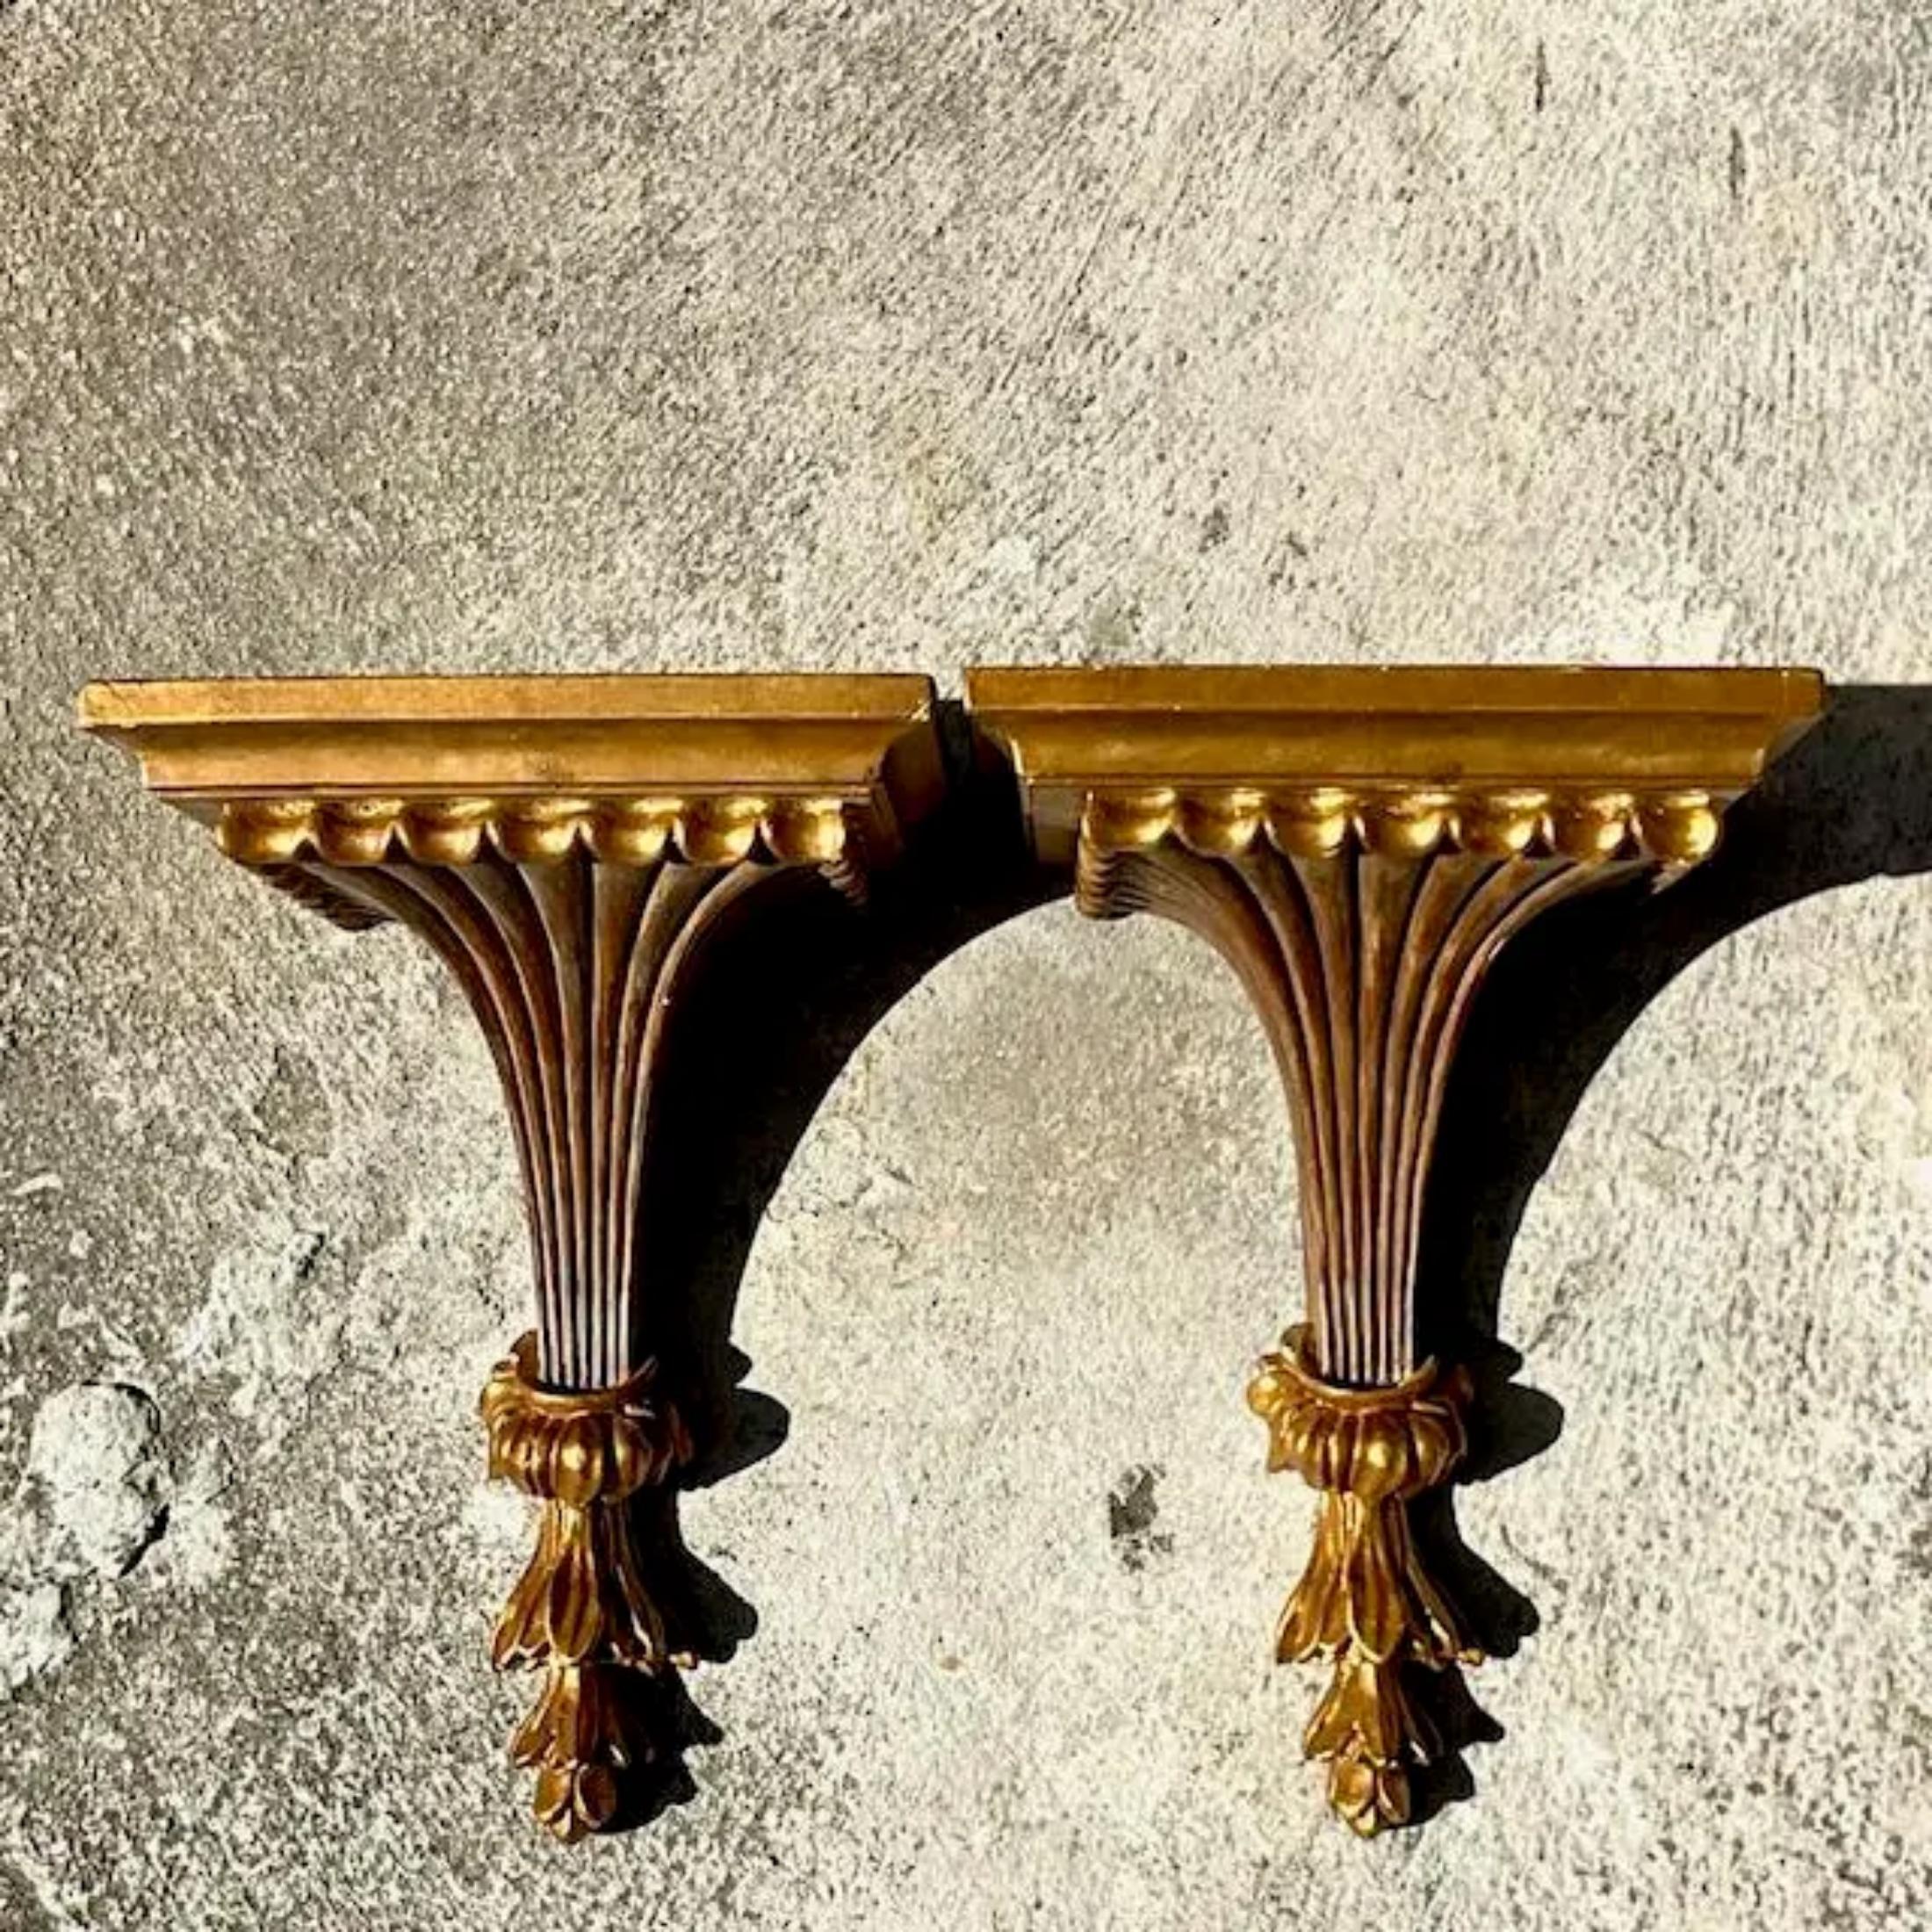 A fabulous pair of vintage Regency wall brackets. Chic gilt finish on a classic design. Acquired from a Palm Beach estate.